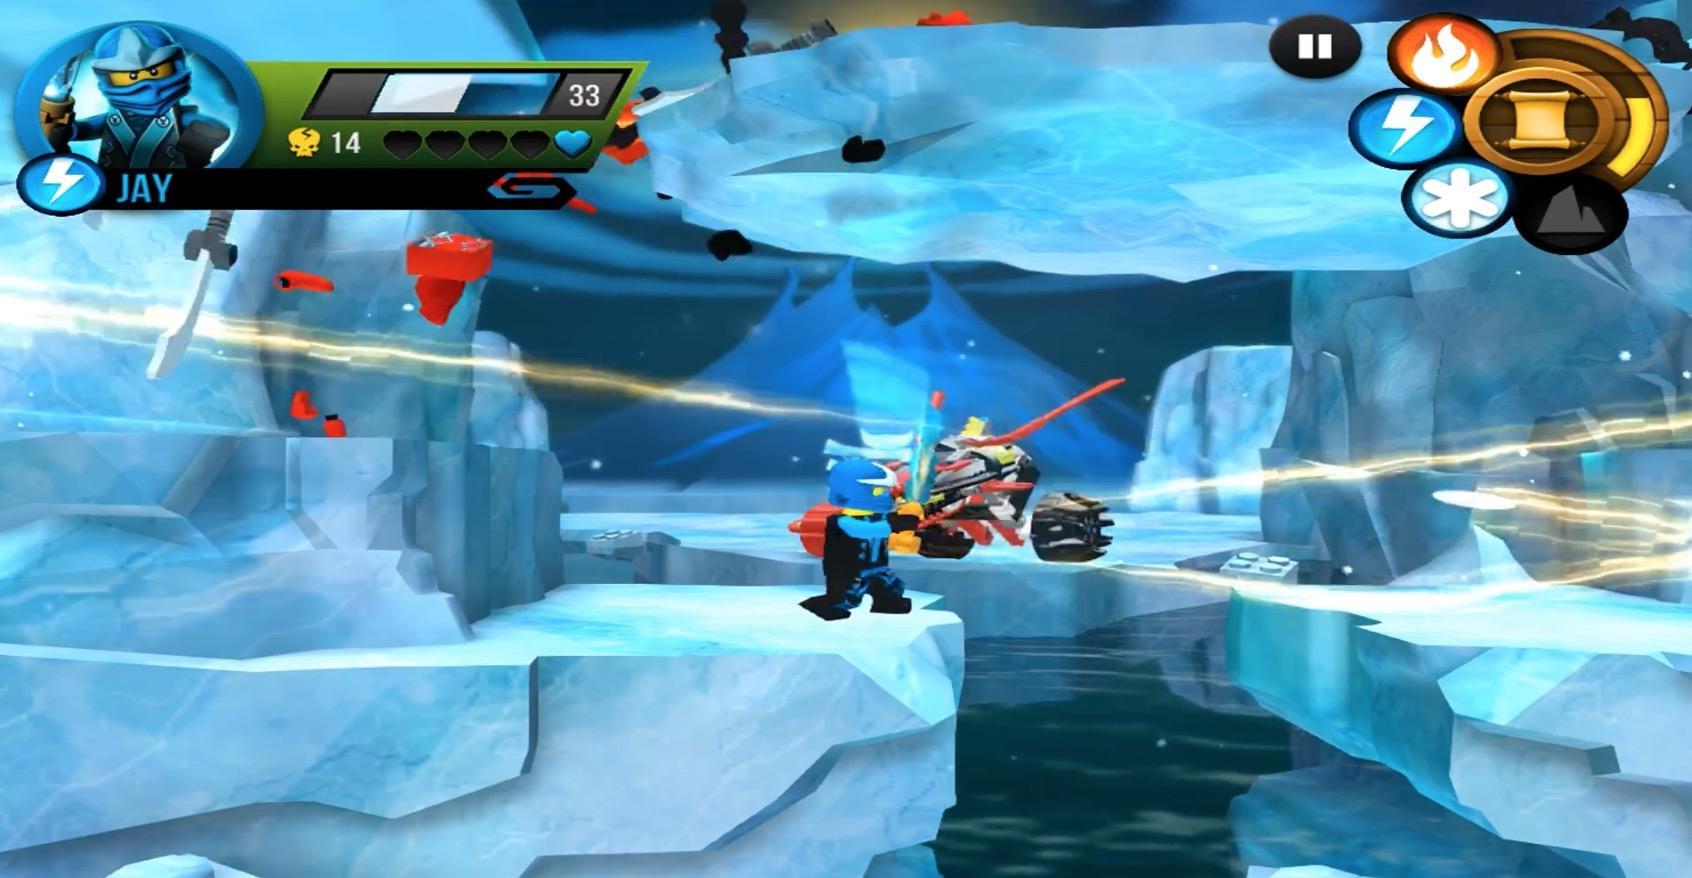 Tips LEGO Ninjago The Final Battle for Android - APK Download